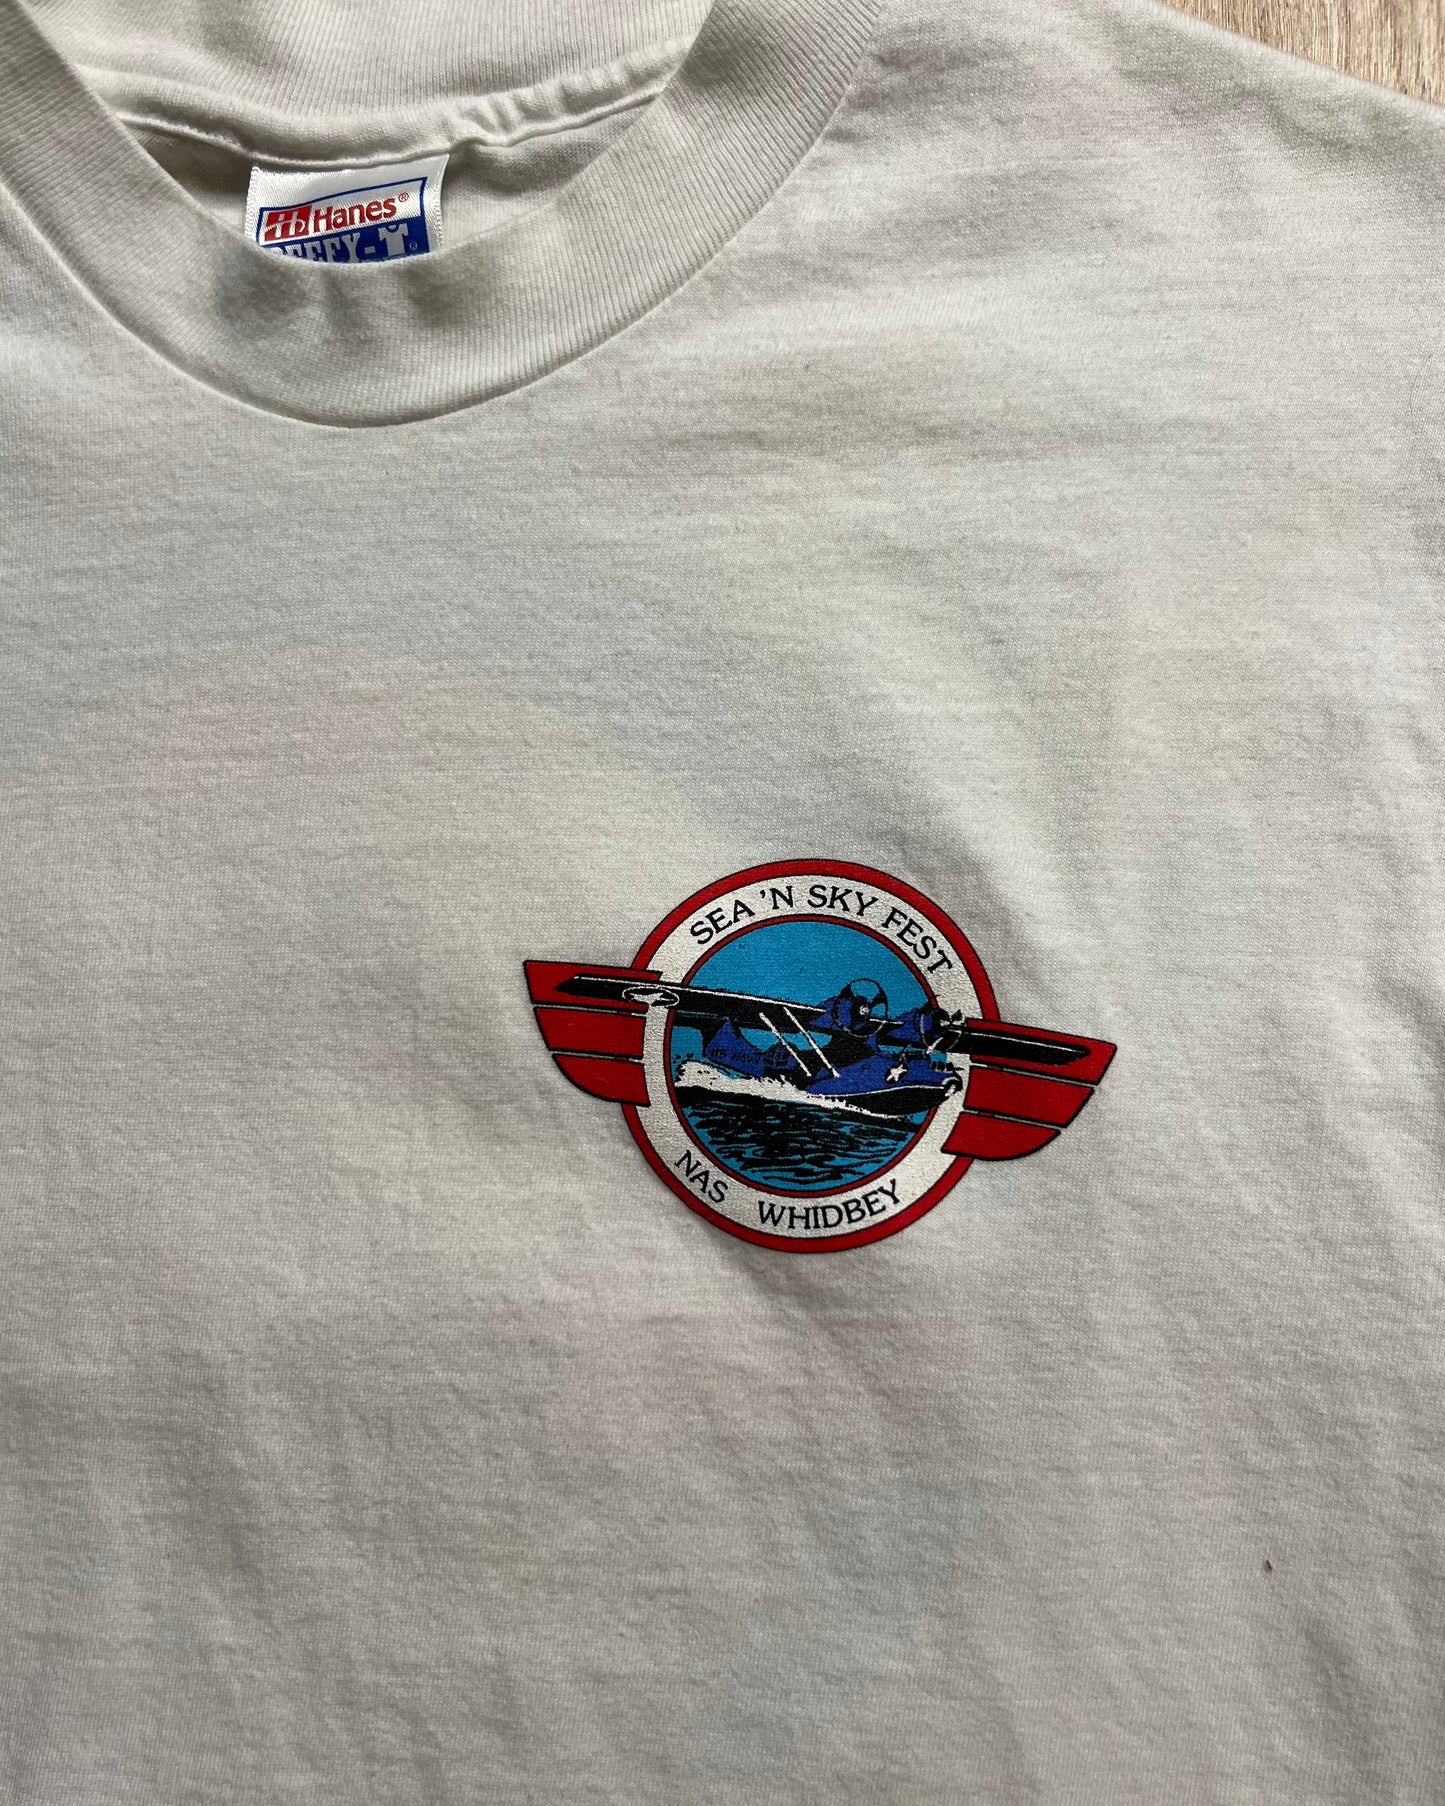 1996 Sea 'n Sky Fest "The Russians Are Coming" Single Stitch T-Shirt